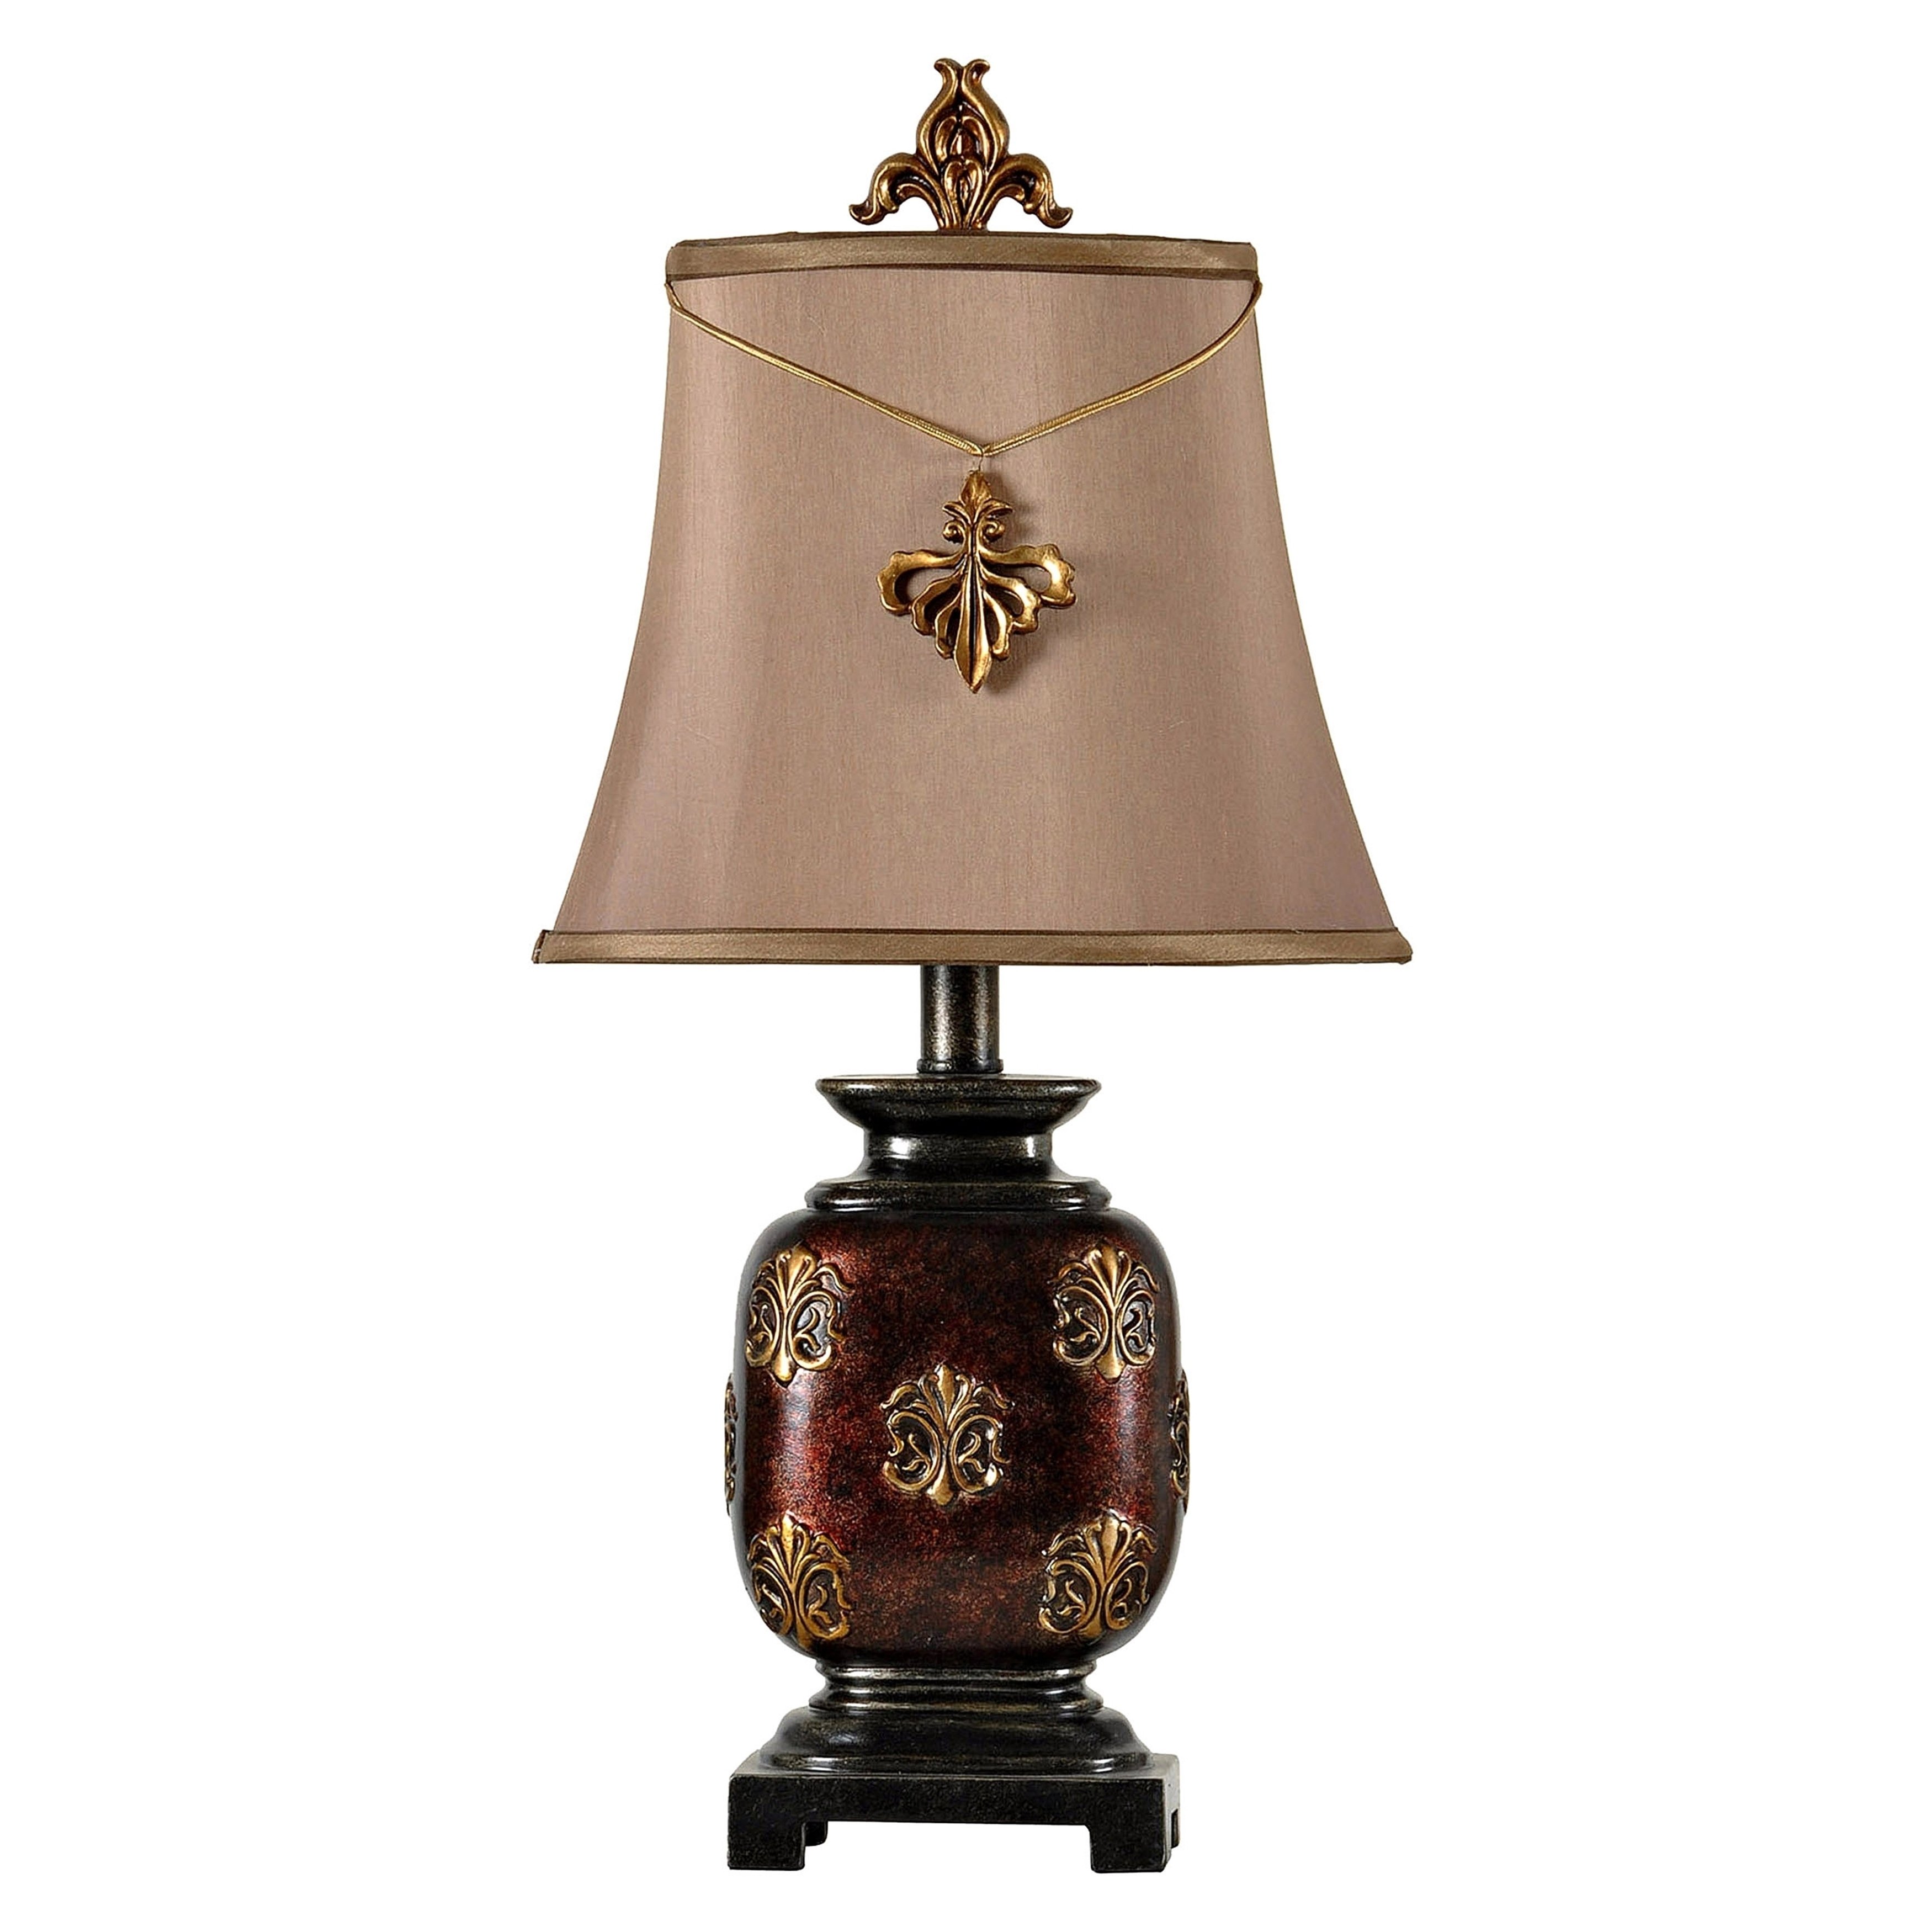 maximus bronze mini accent table lamp with fleur lis pendant stylecraft beige fabric shade lamps free shipping orders over best linens marble and glass coffee resin wicker chairs